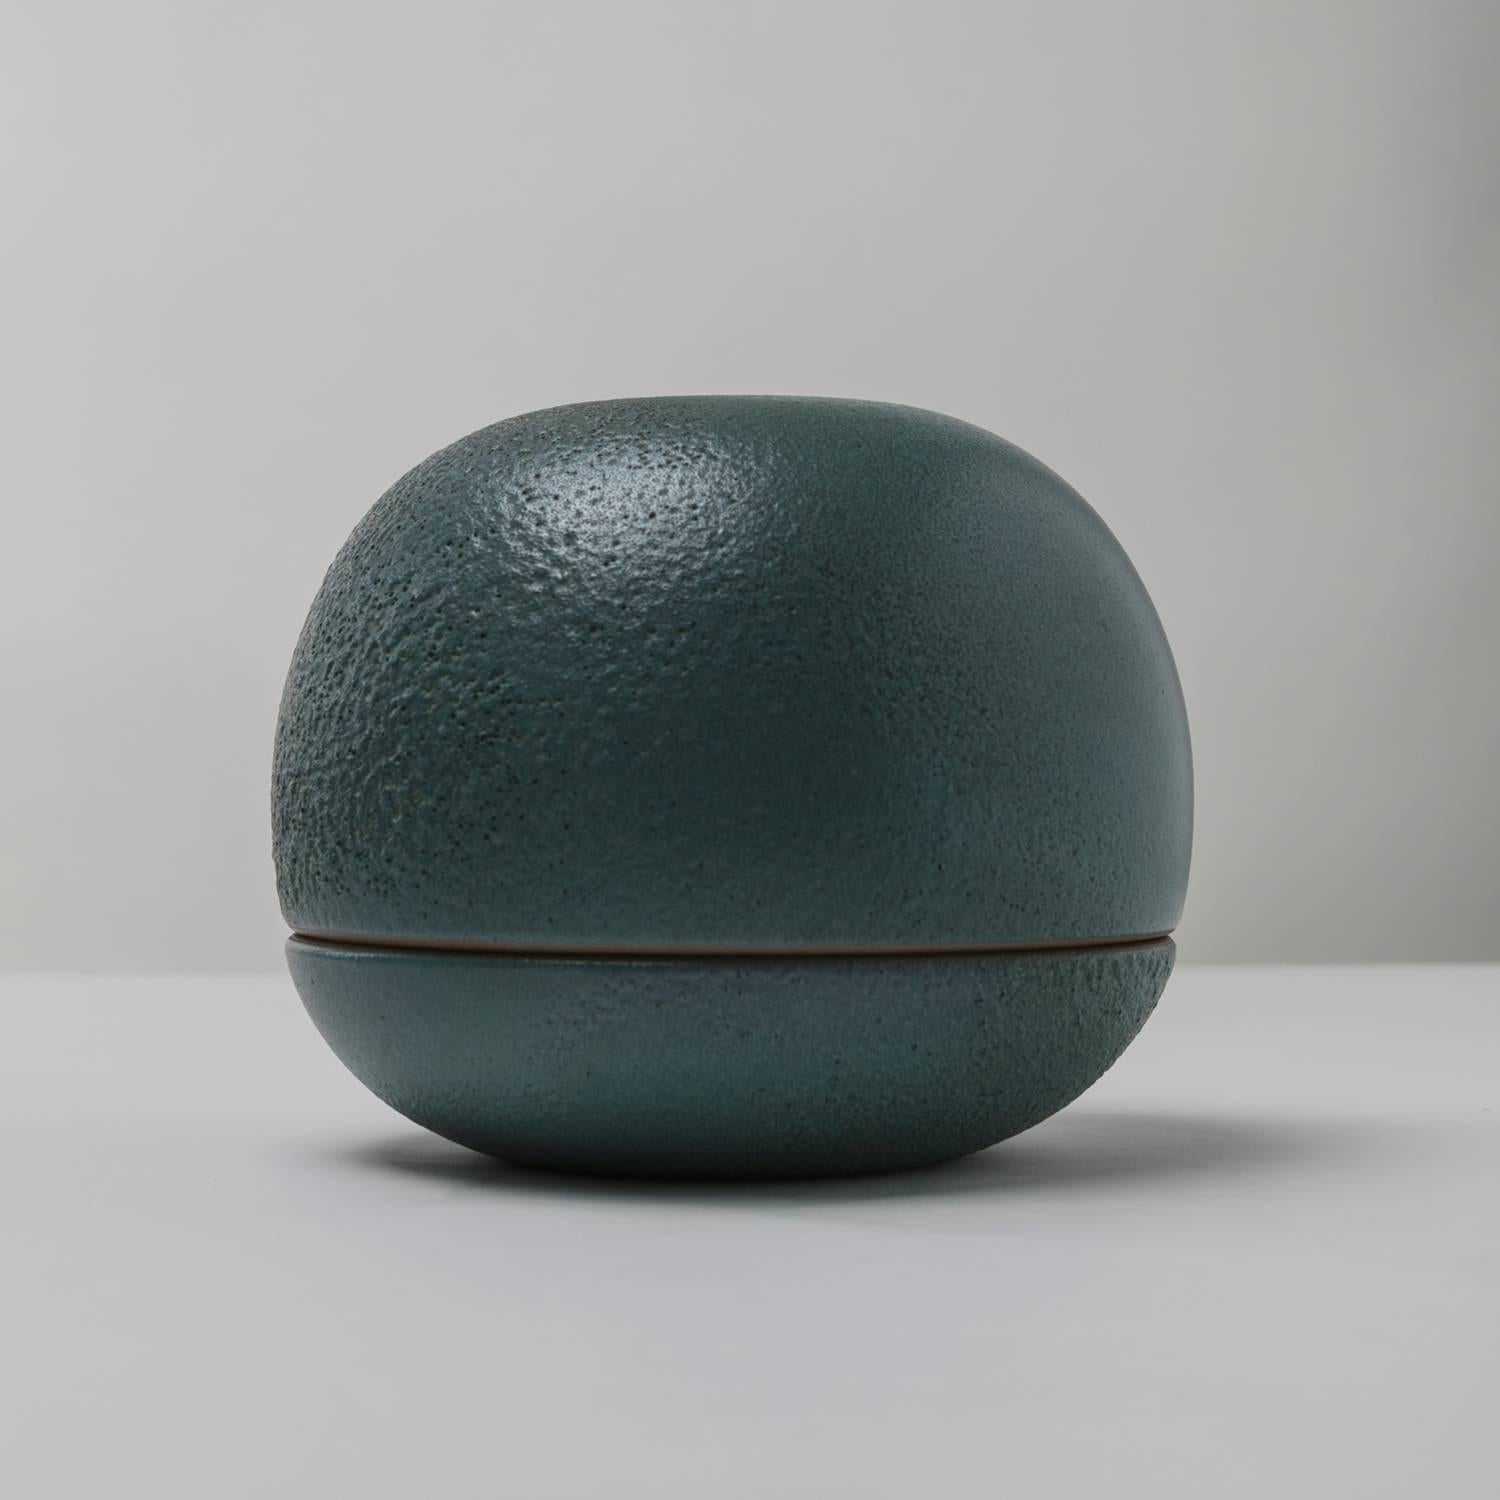 Ceramic centerpiece by Franco Bucci for Laboratorio Pesaro.
Movable top reveals the inside shape of the lower element.
Another piece by Franco Bucci available, as pictured in the images.